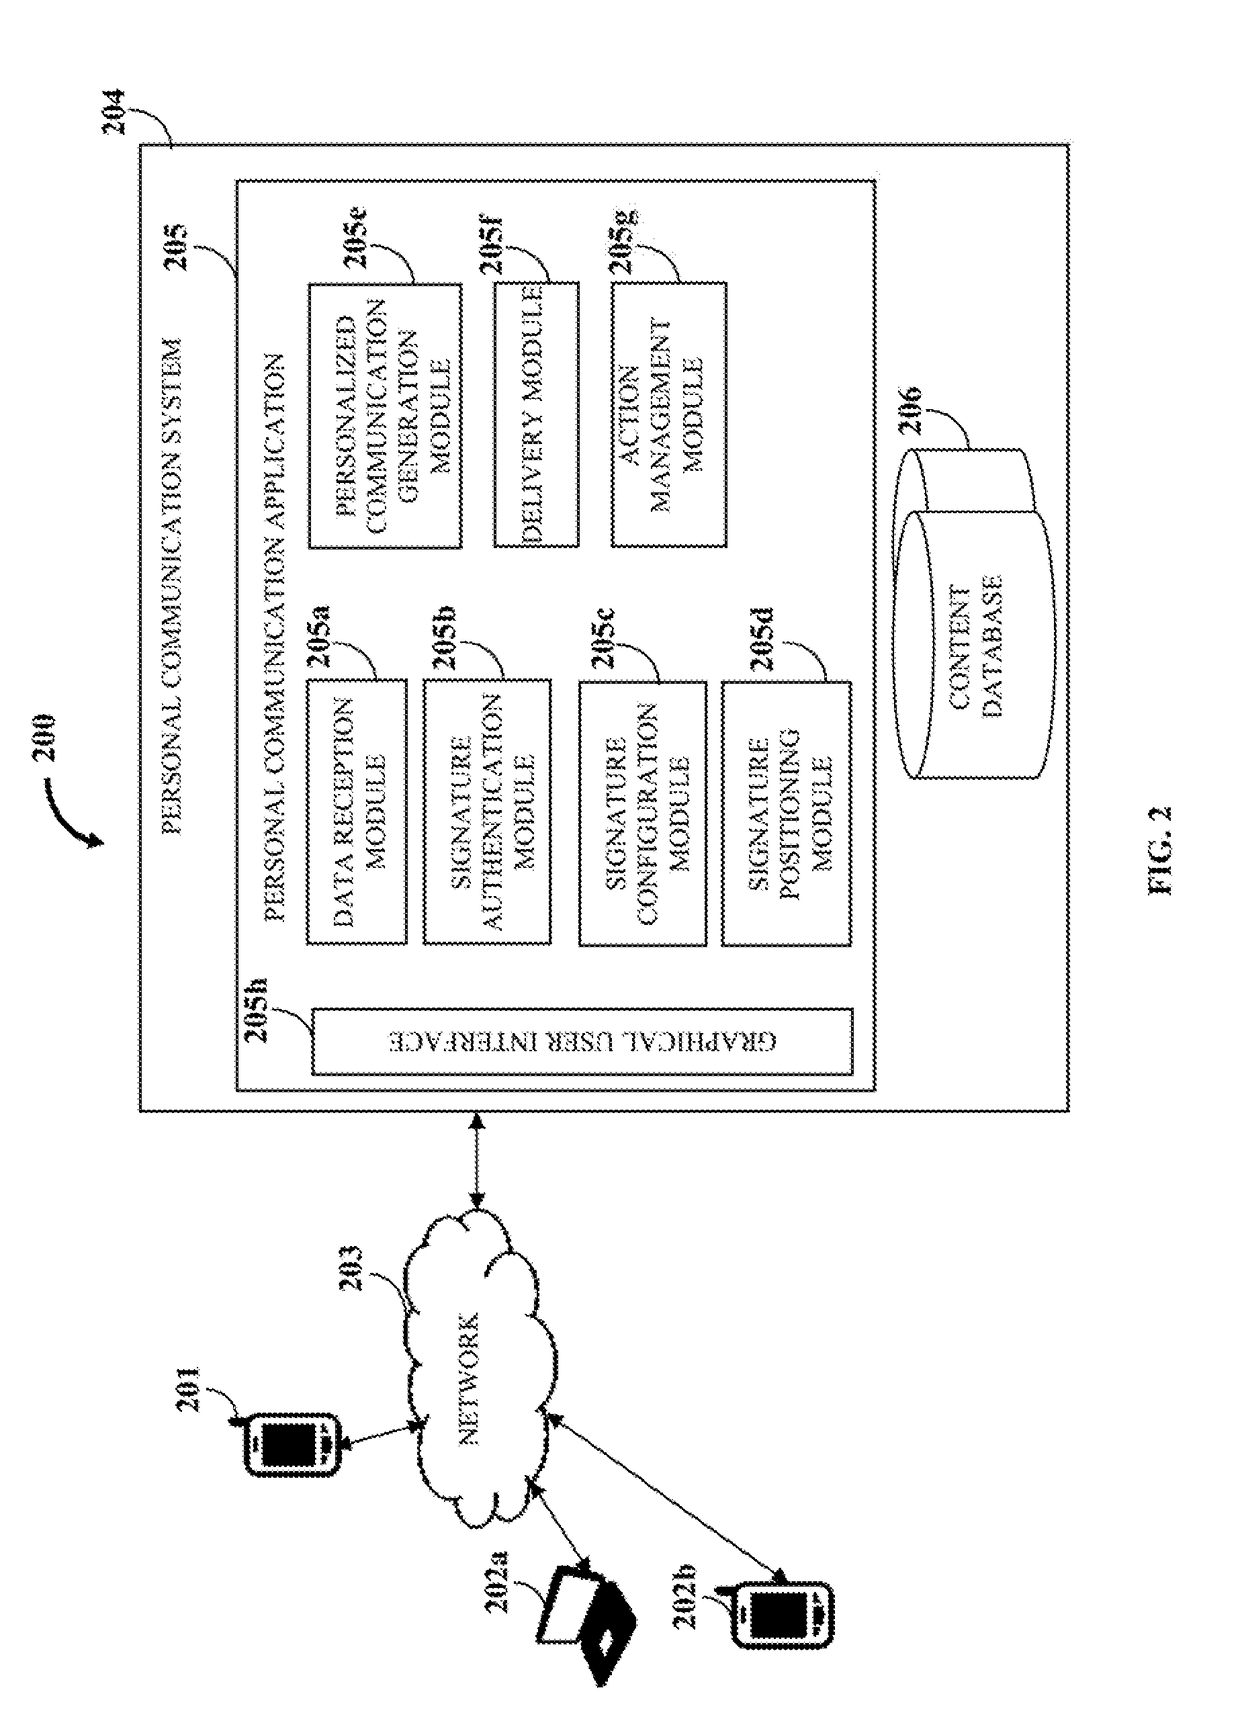 Electronic Personal Signature Generation And Distribution For Personal Communication